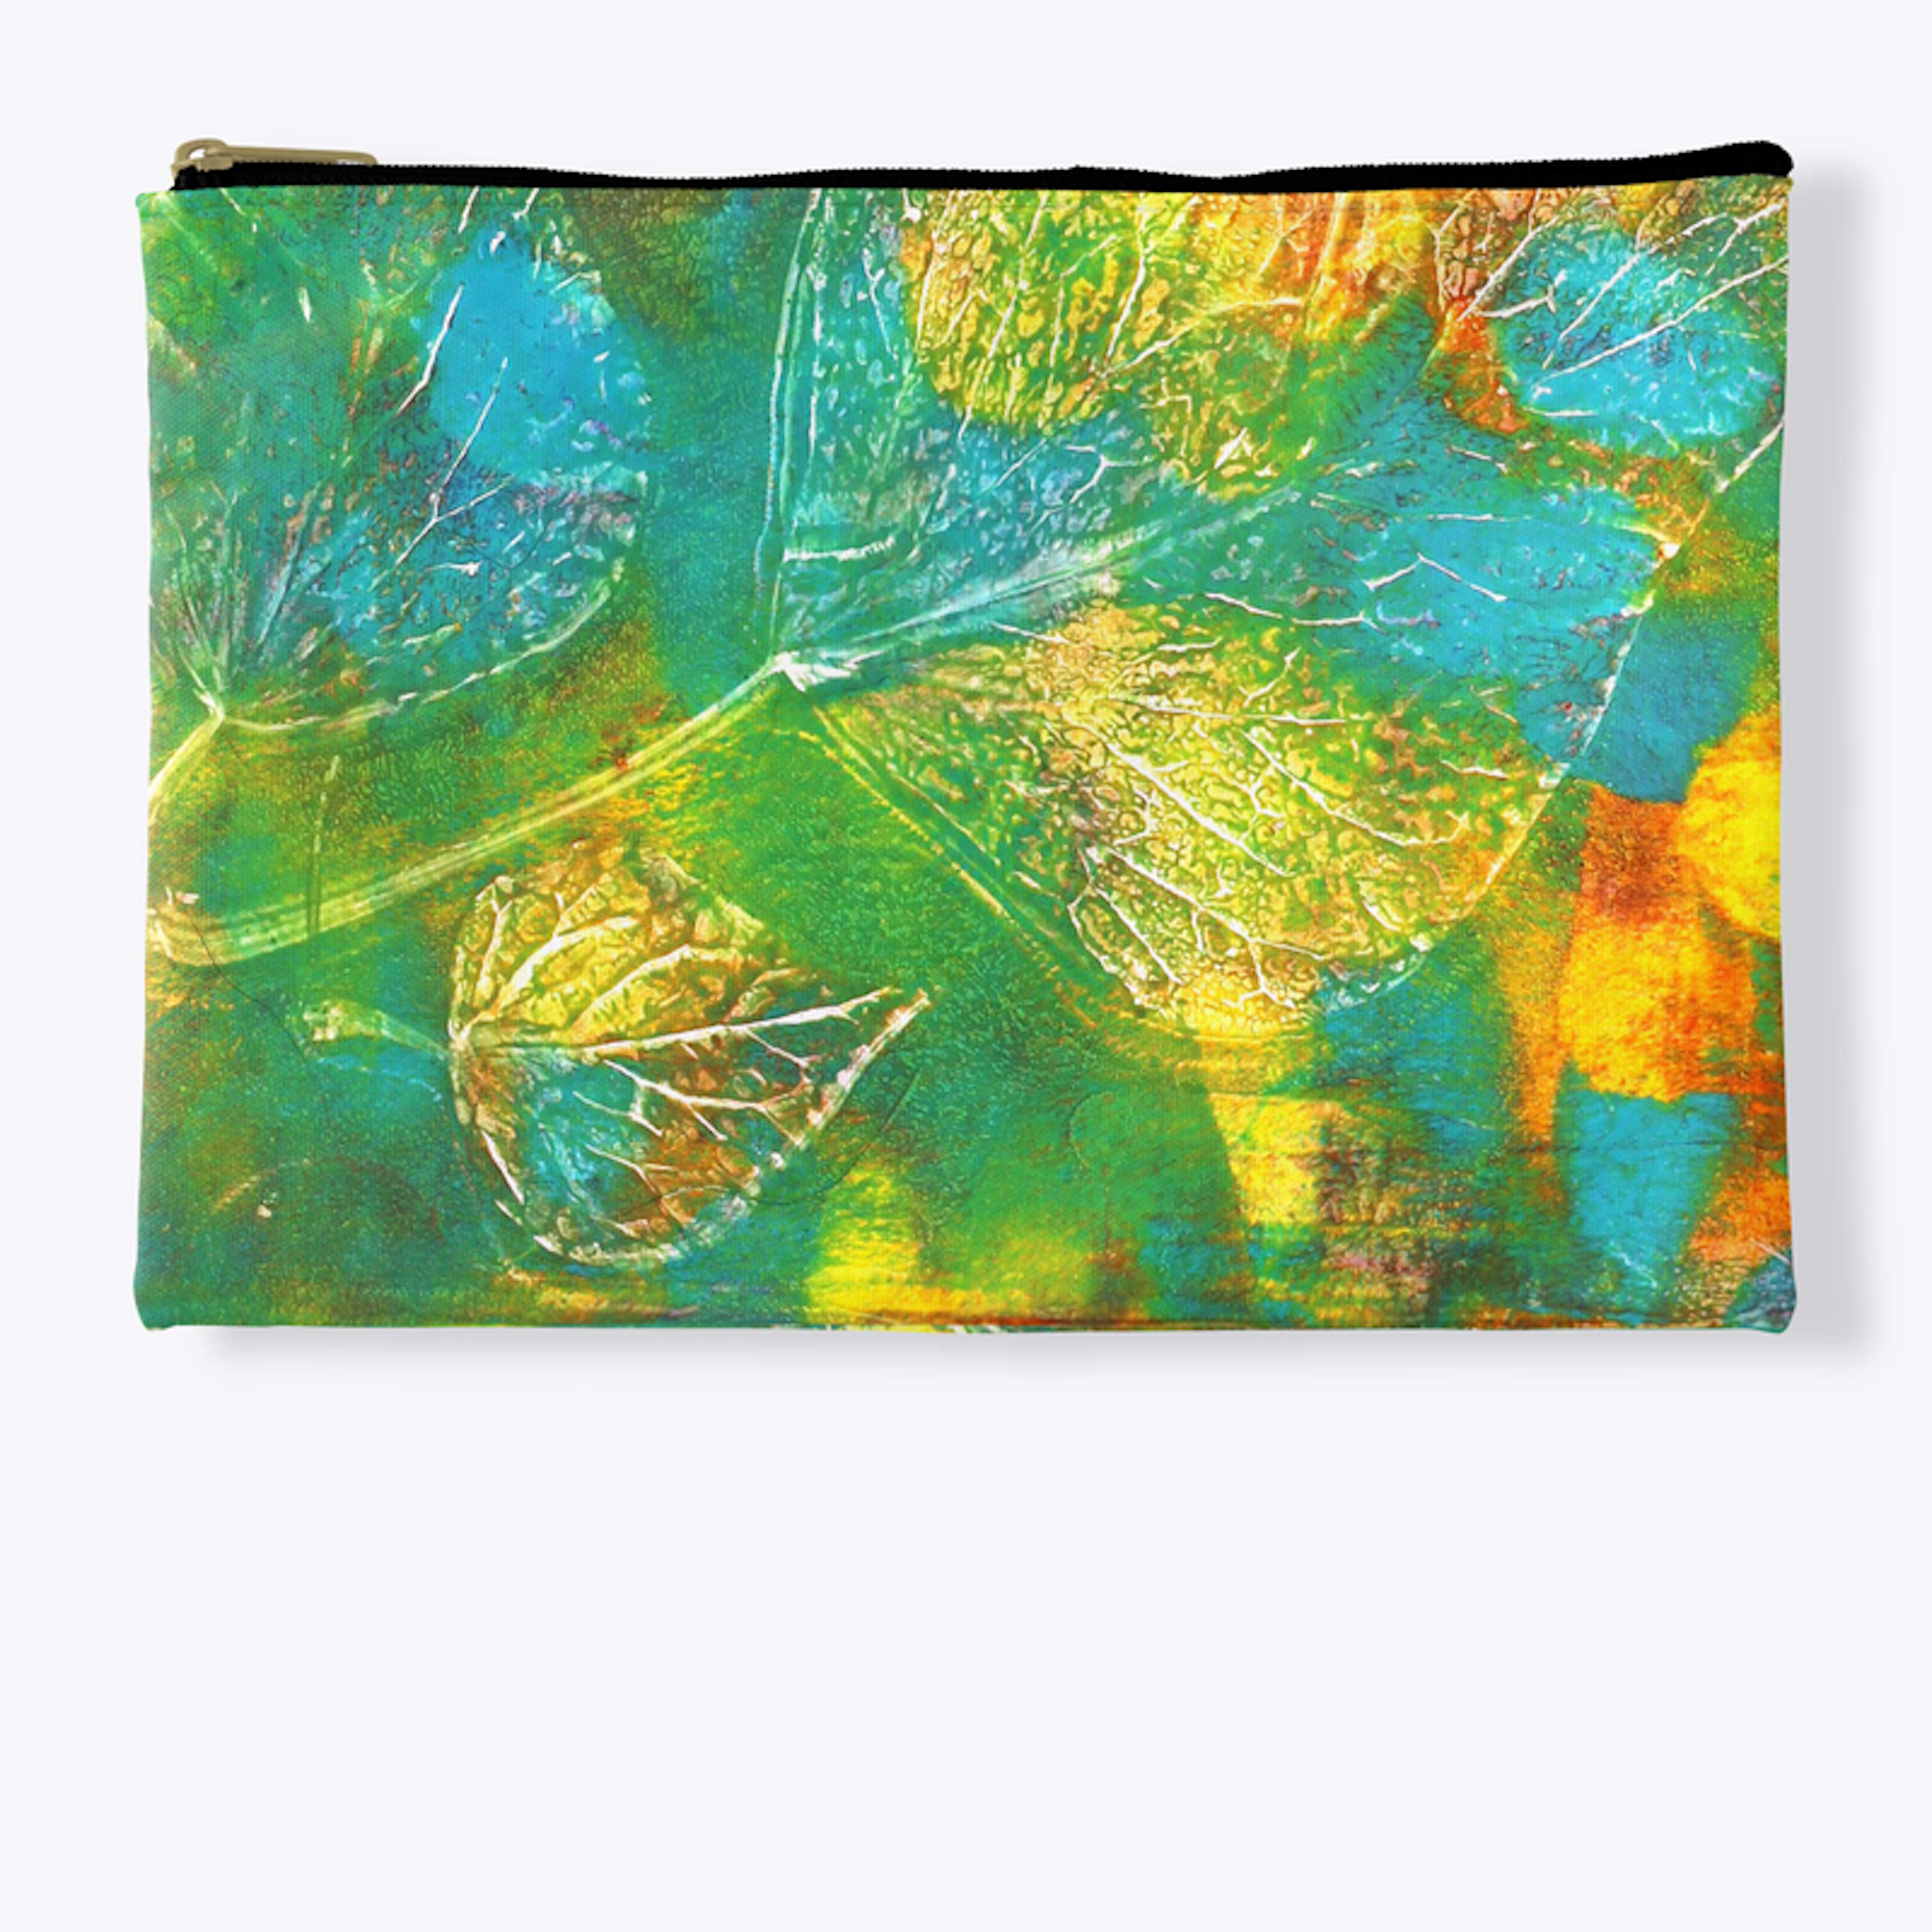 Accessory Pouch Large - Ivy